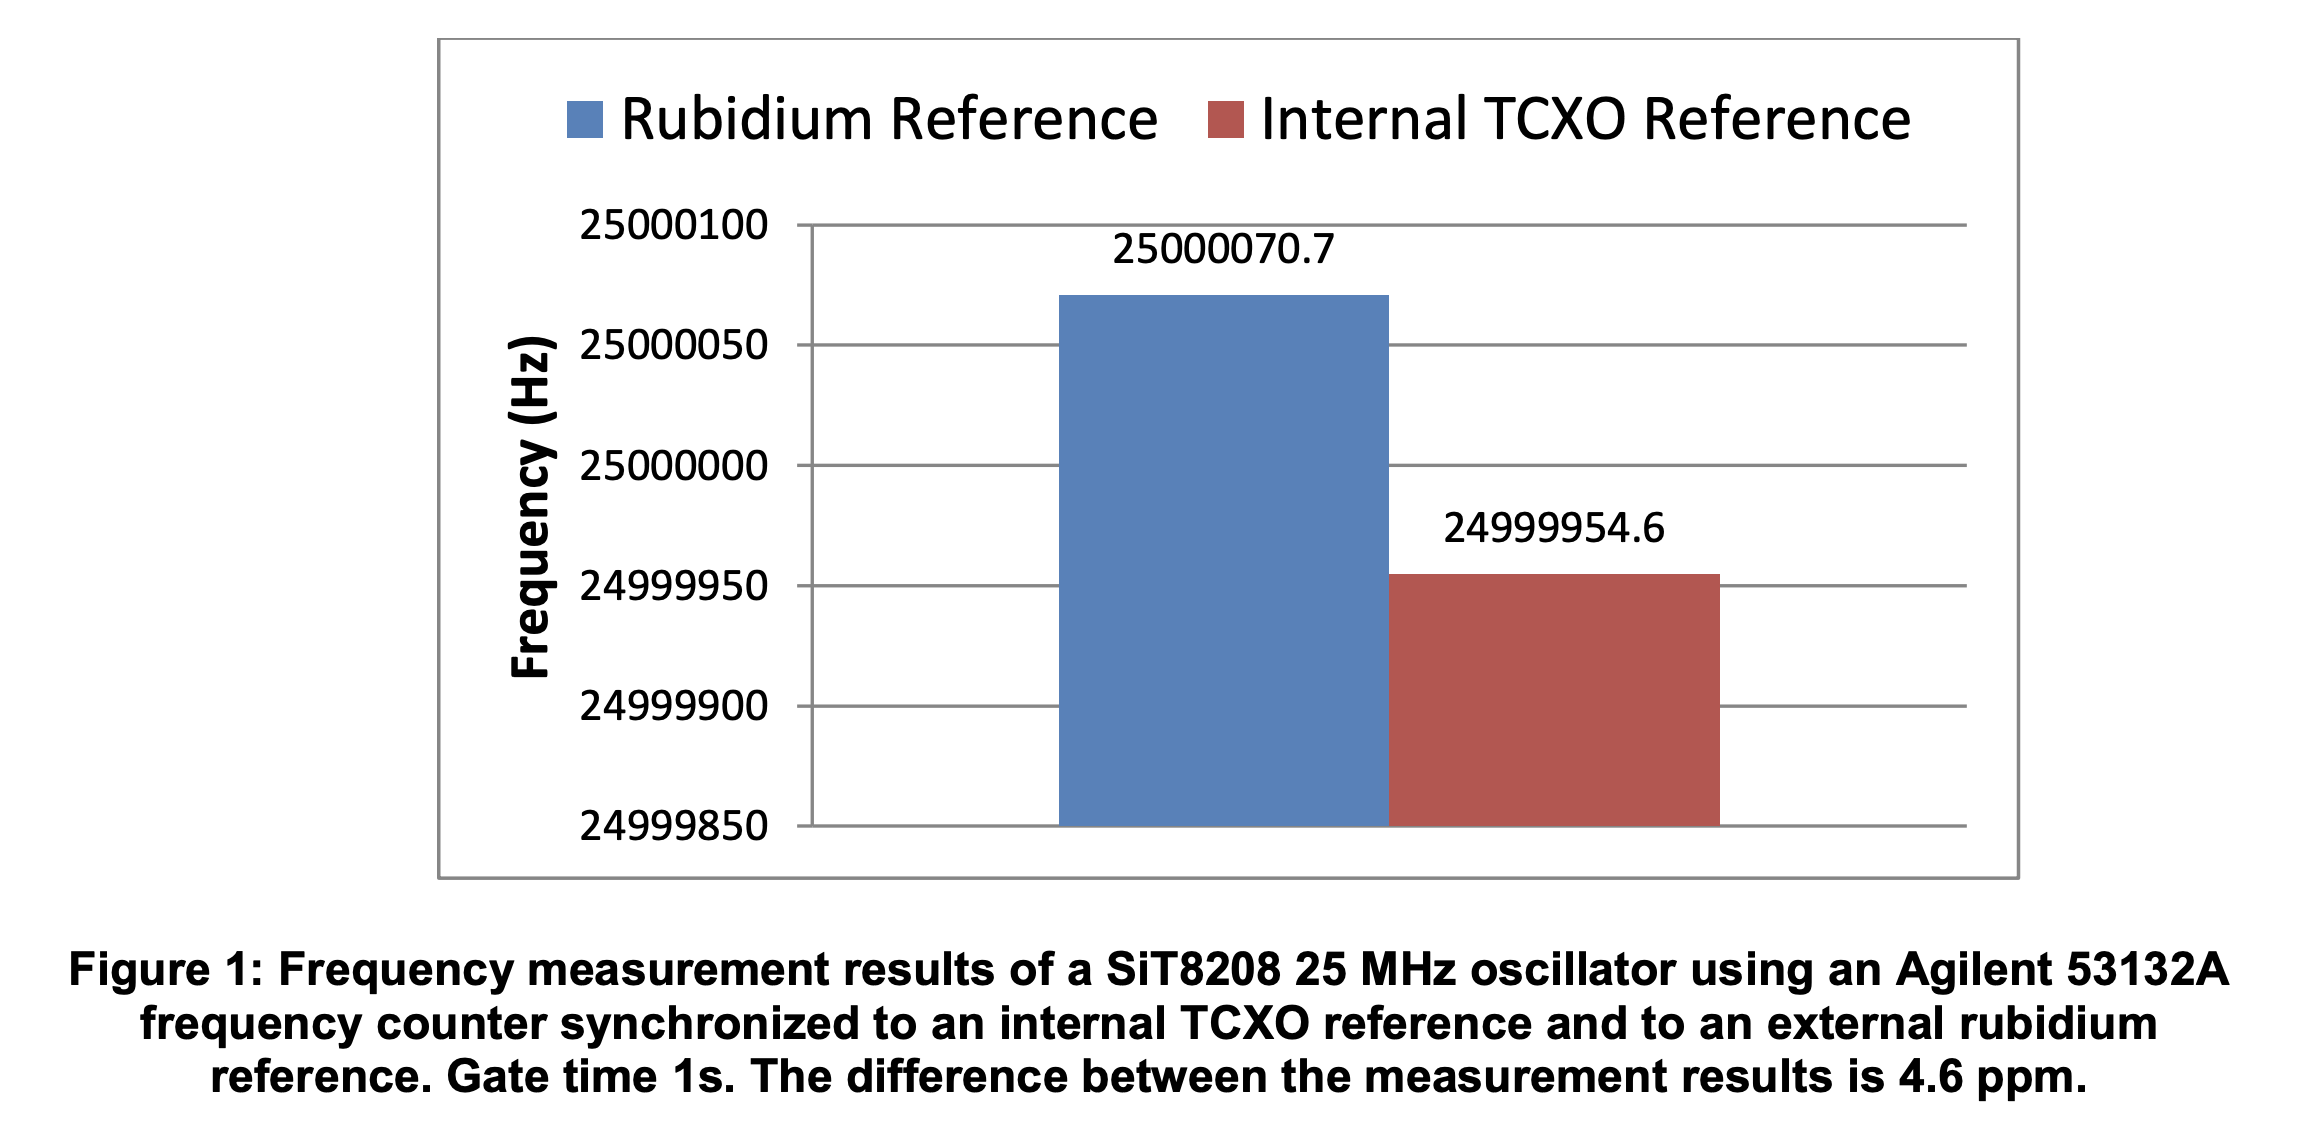 Figure 1 Frequency Measurement results of a Sit8208 25 MHz oscillator